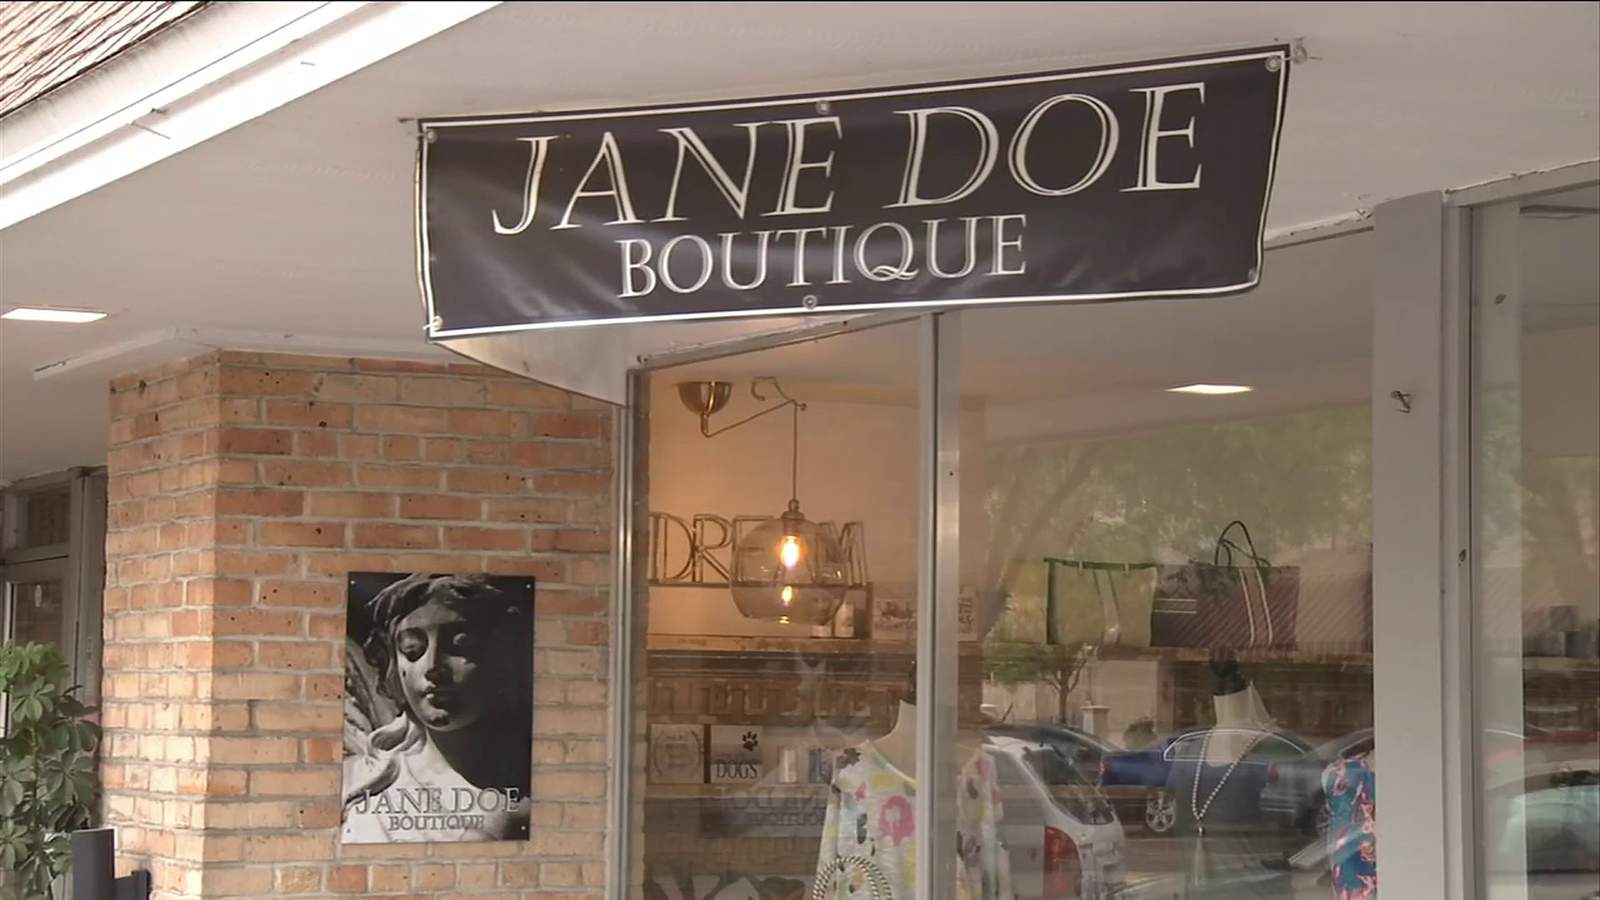 Local boutique honored as one of Southern Living’s ‘Best of the South’